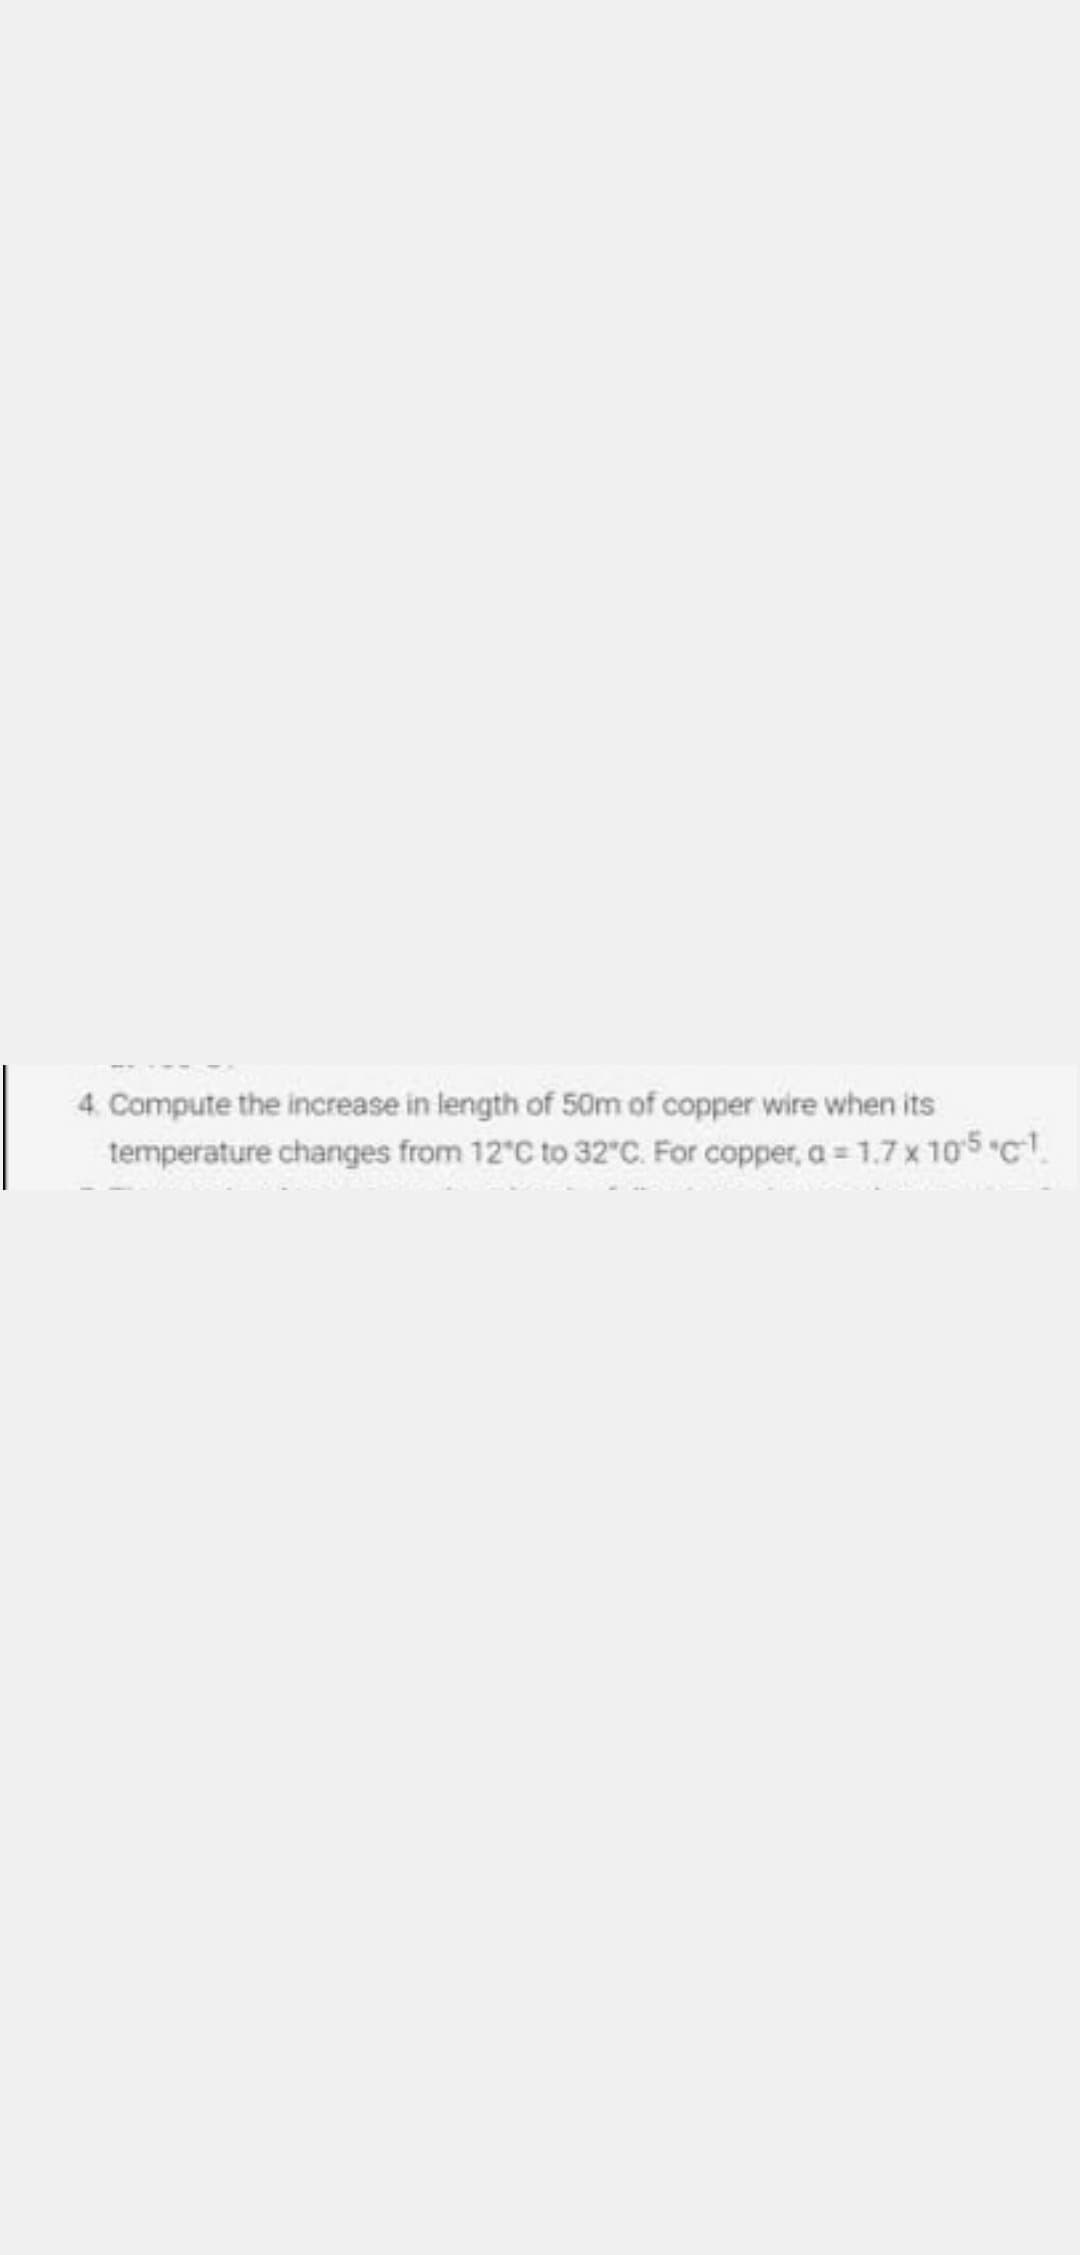 4. Compute the increase in length of 50m of copper wire when its
temperature changes from 12'C to 32 C. For copper, a = 1.7 x 10s c.
